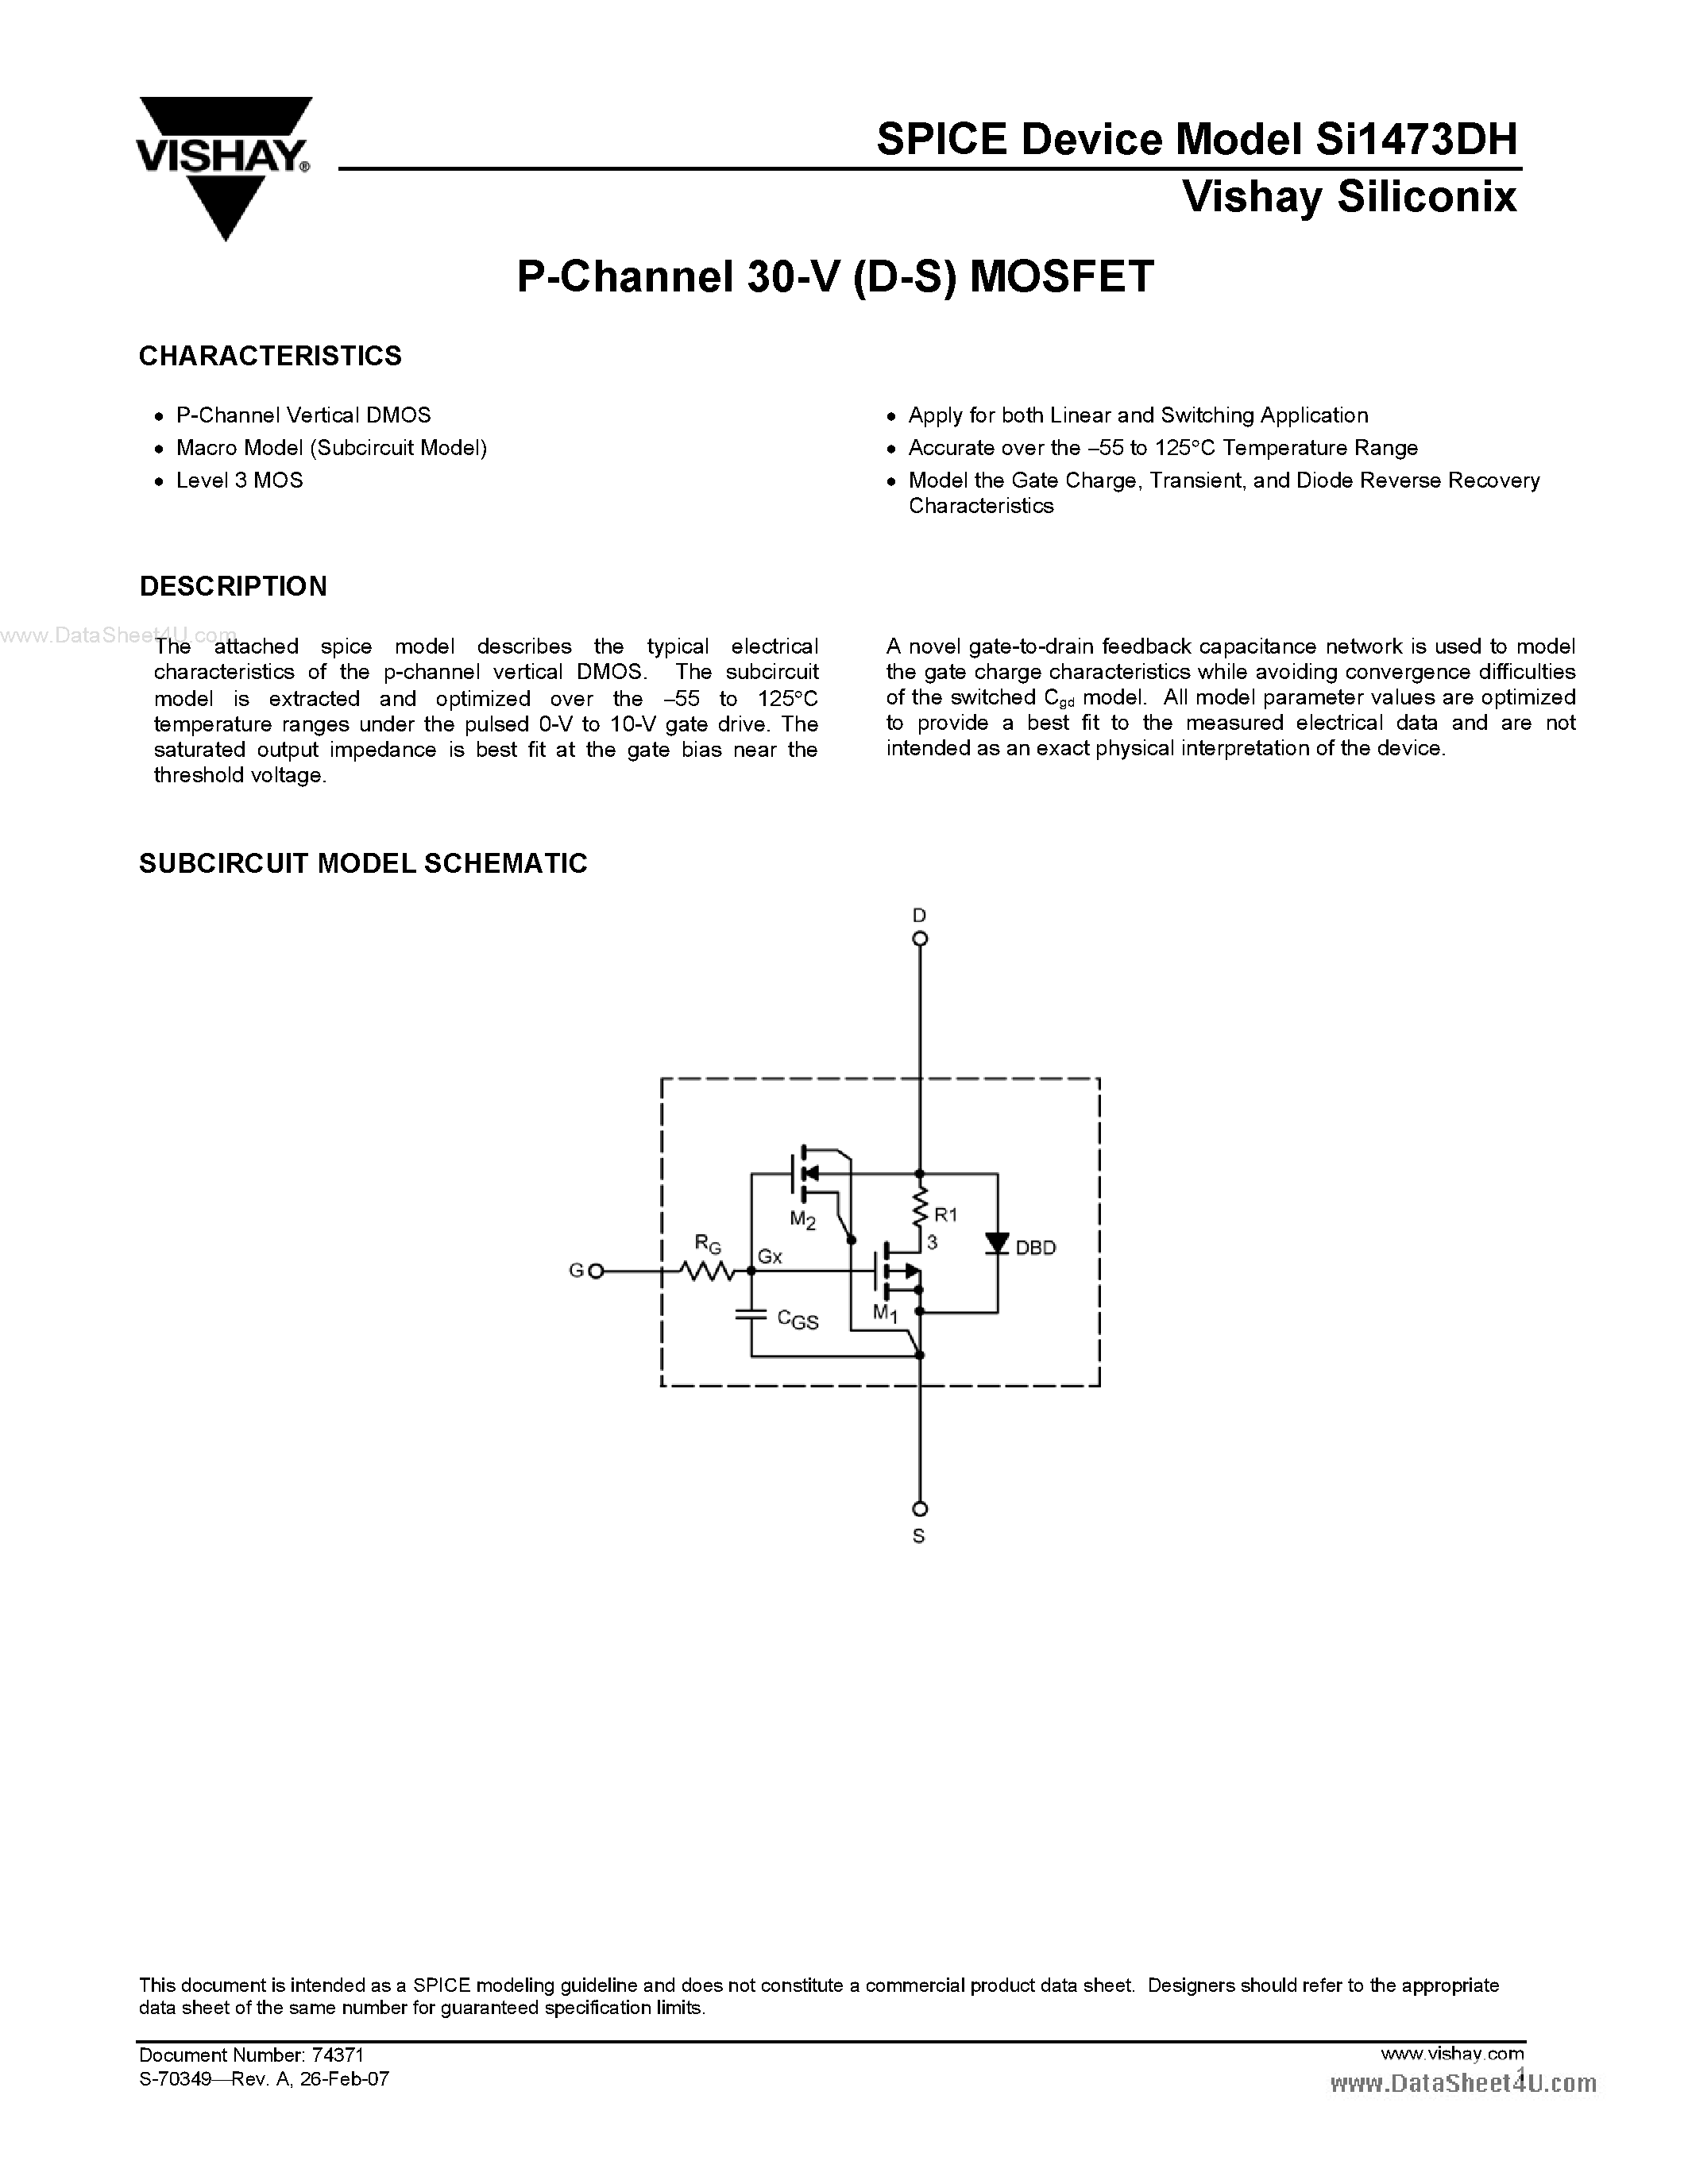 Даташит SI1473DH - P-Channel MOSFET страница 1